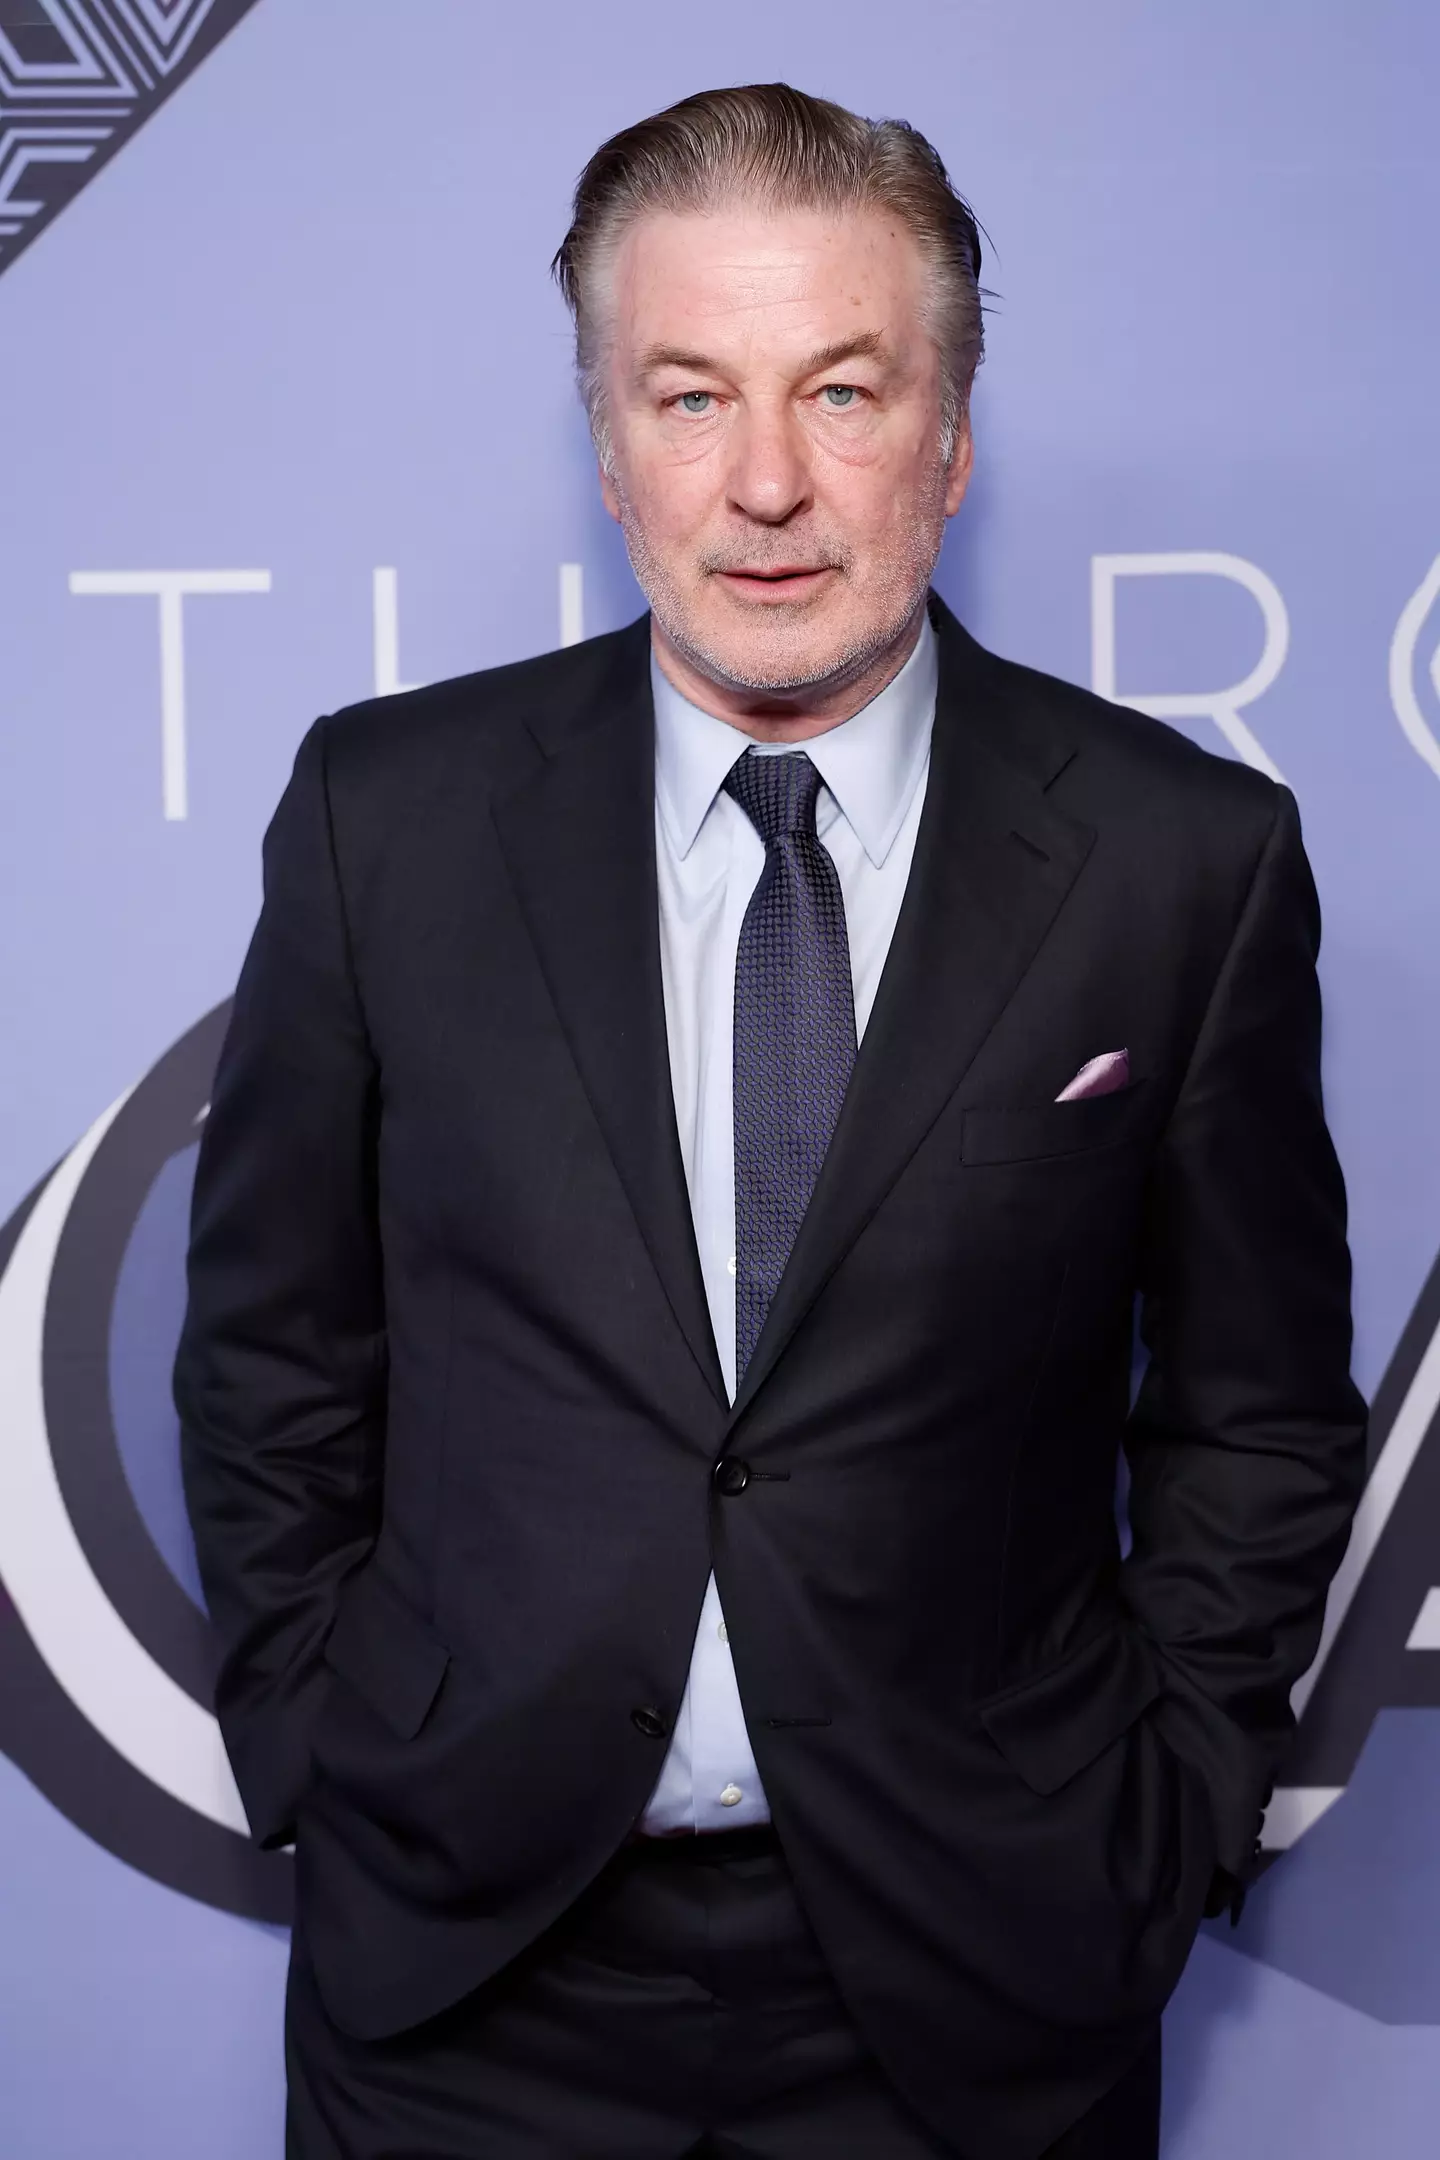 Actor Alec Baldwin was recharged in January.